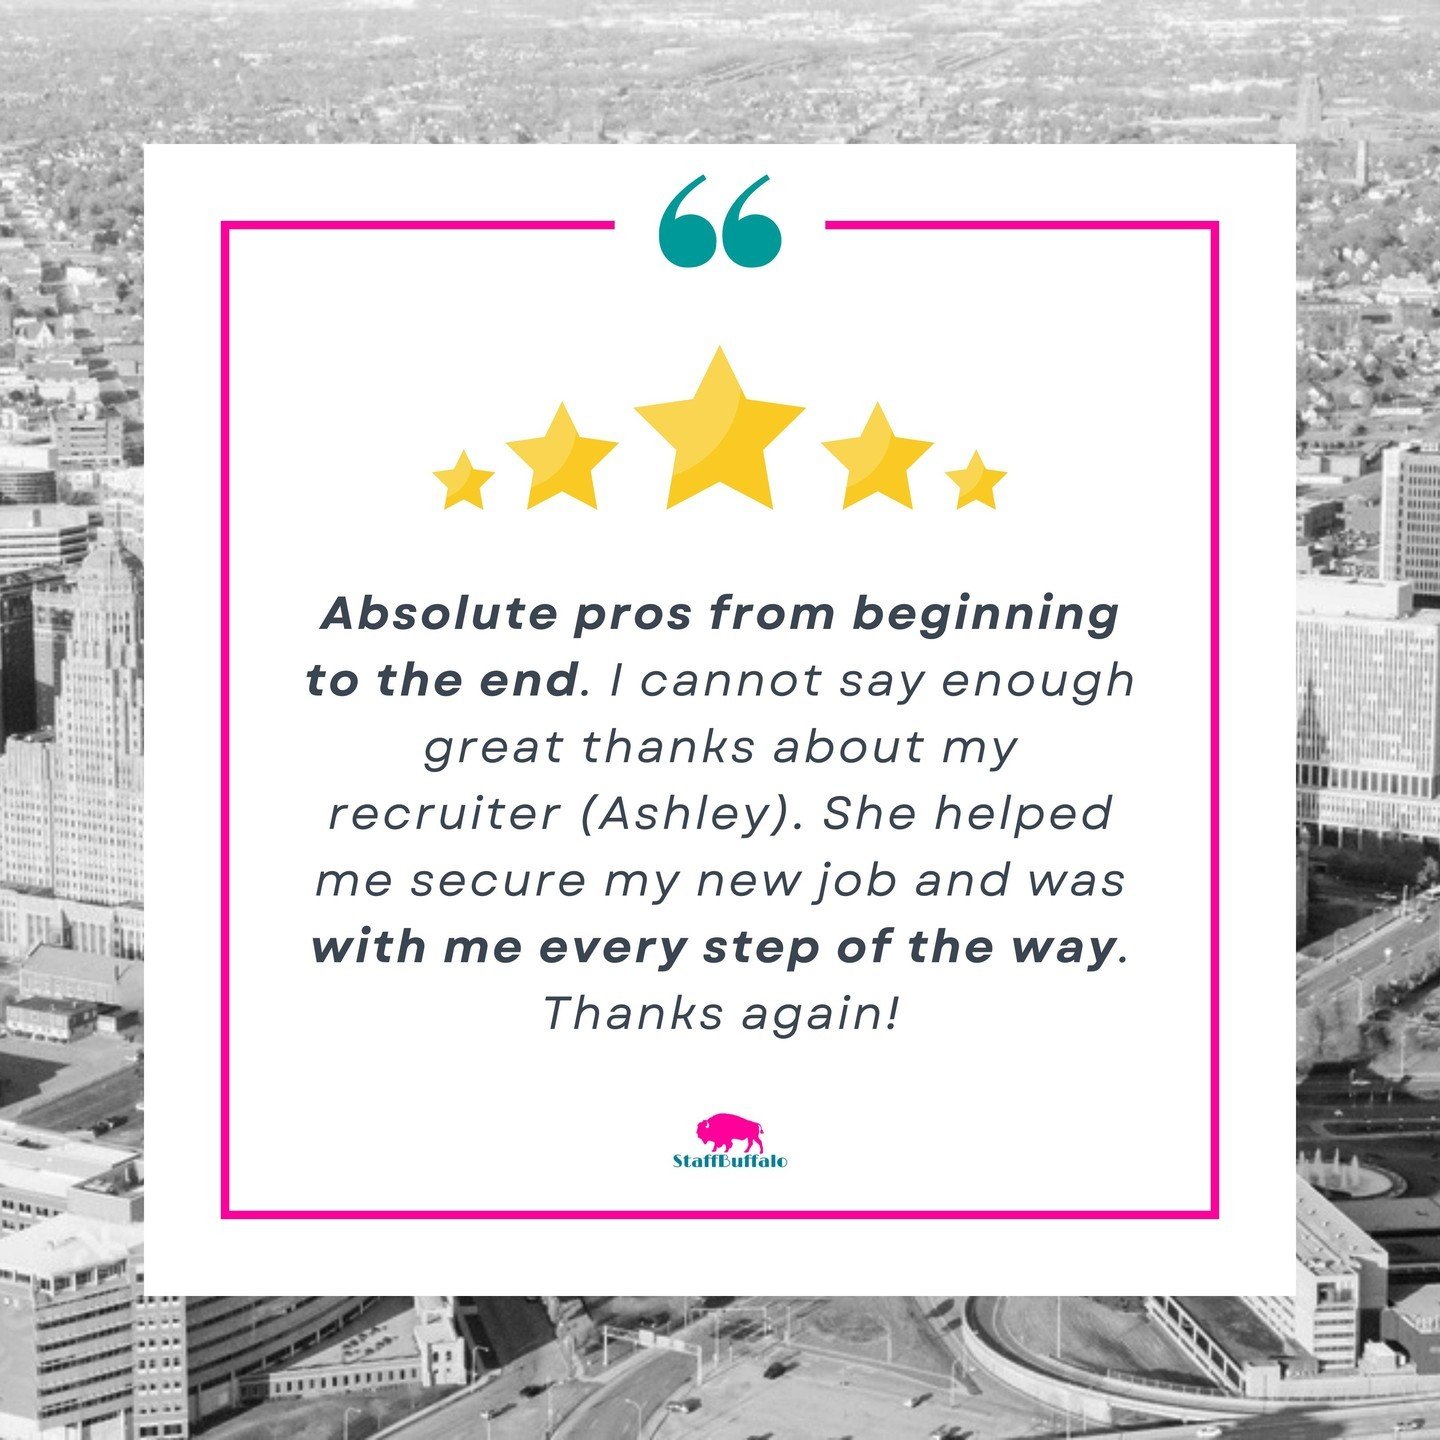 We're so proud of @ashleyn9583's dedication and the impact she's making on job seekers. We understand how overwhelming the process can be, which is why we're here every step of the way. 

Looking for a job? Take a look at our job seeker services to l